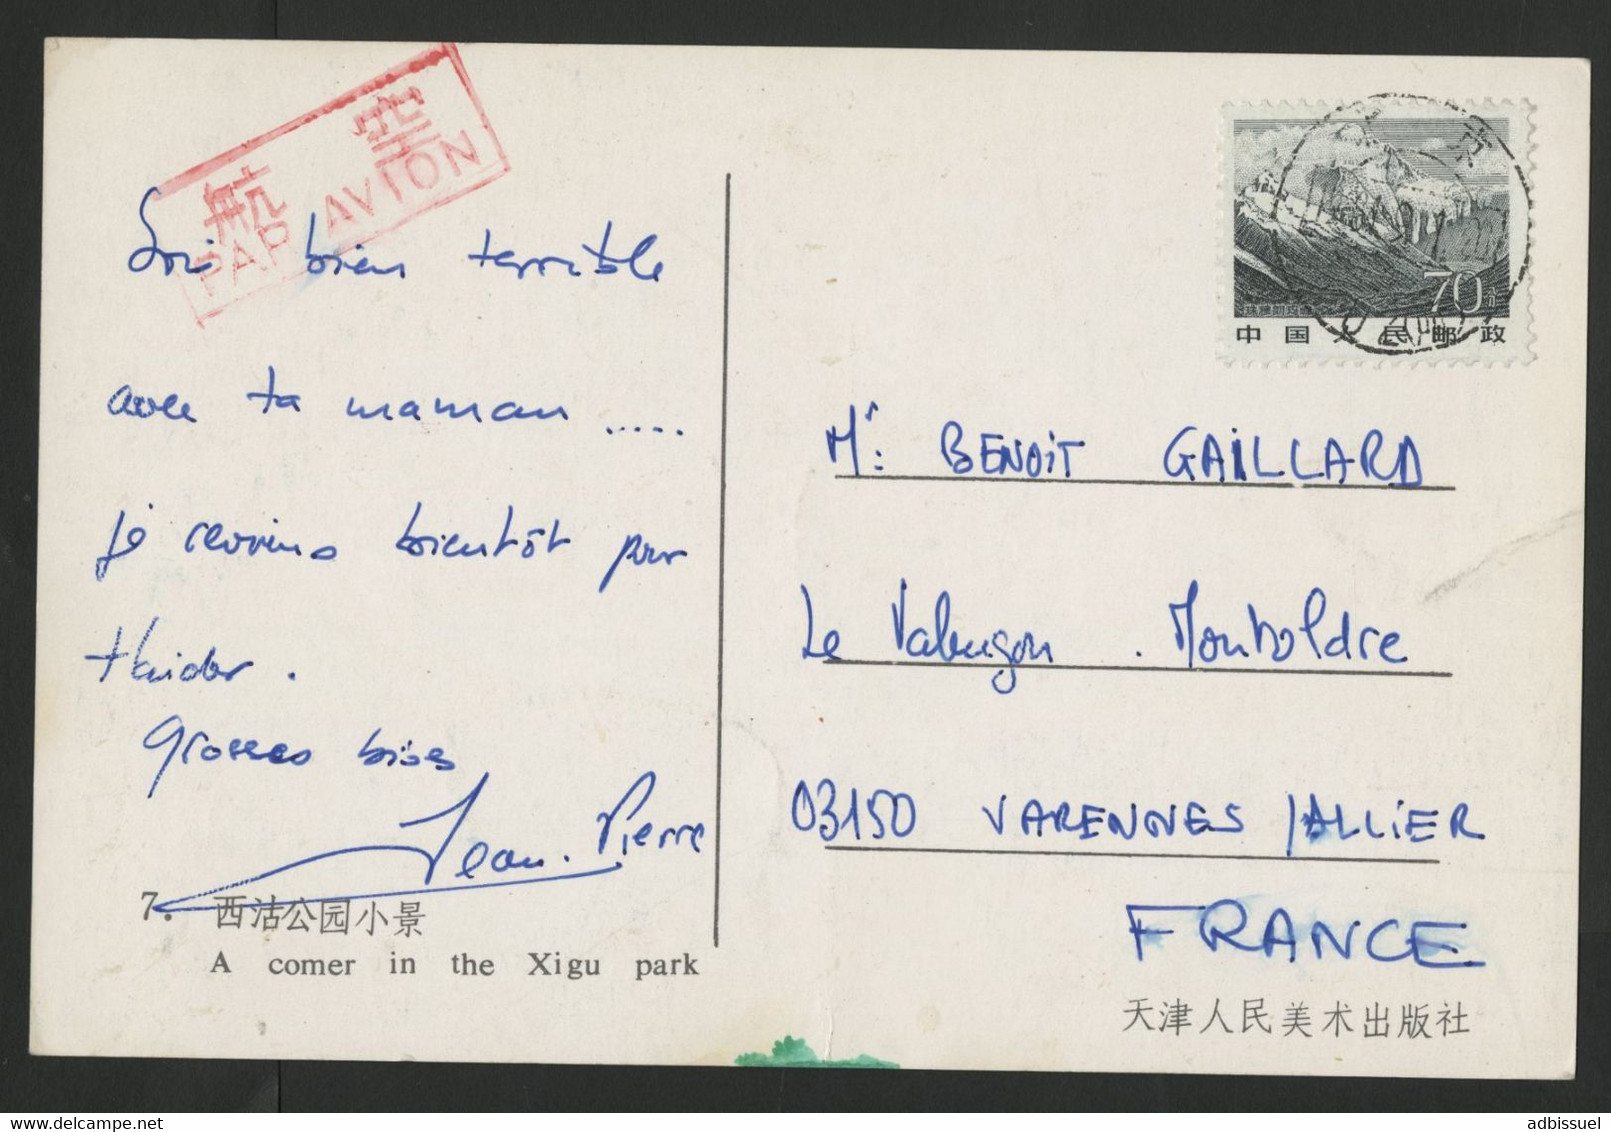 CHINA N° 2588 Zhumulangma / Everest On A Postcard By Airmail To France. - Brieven En Documenten